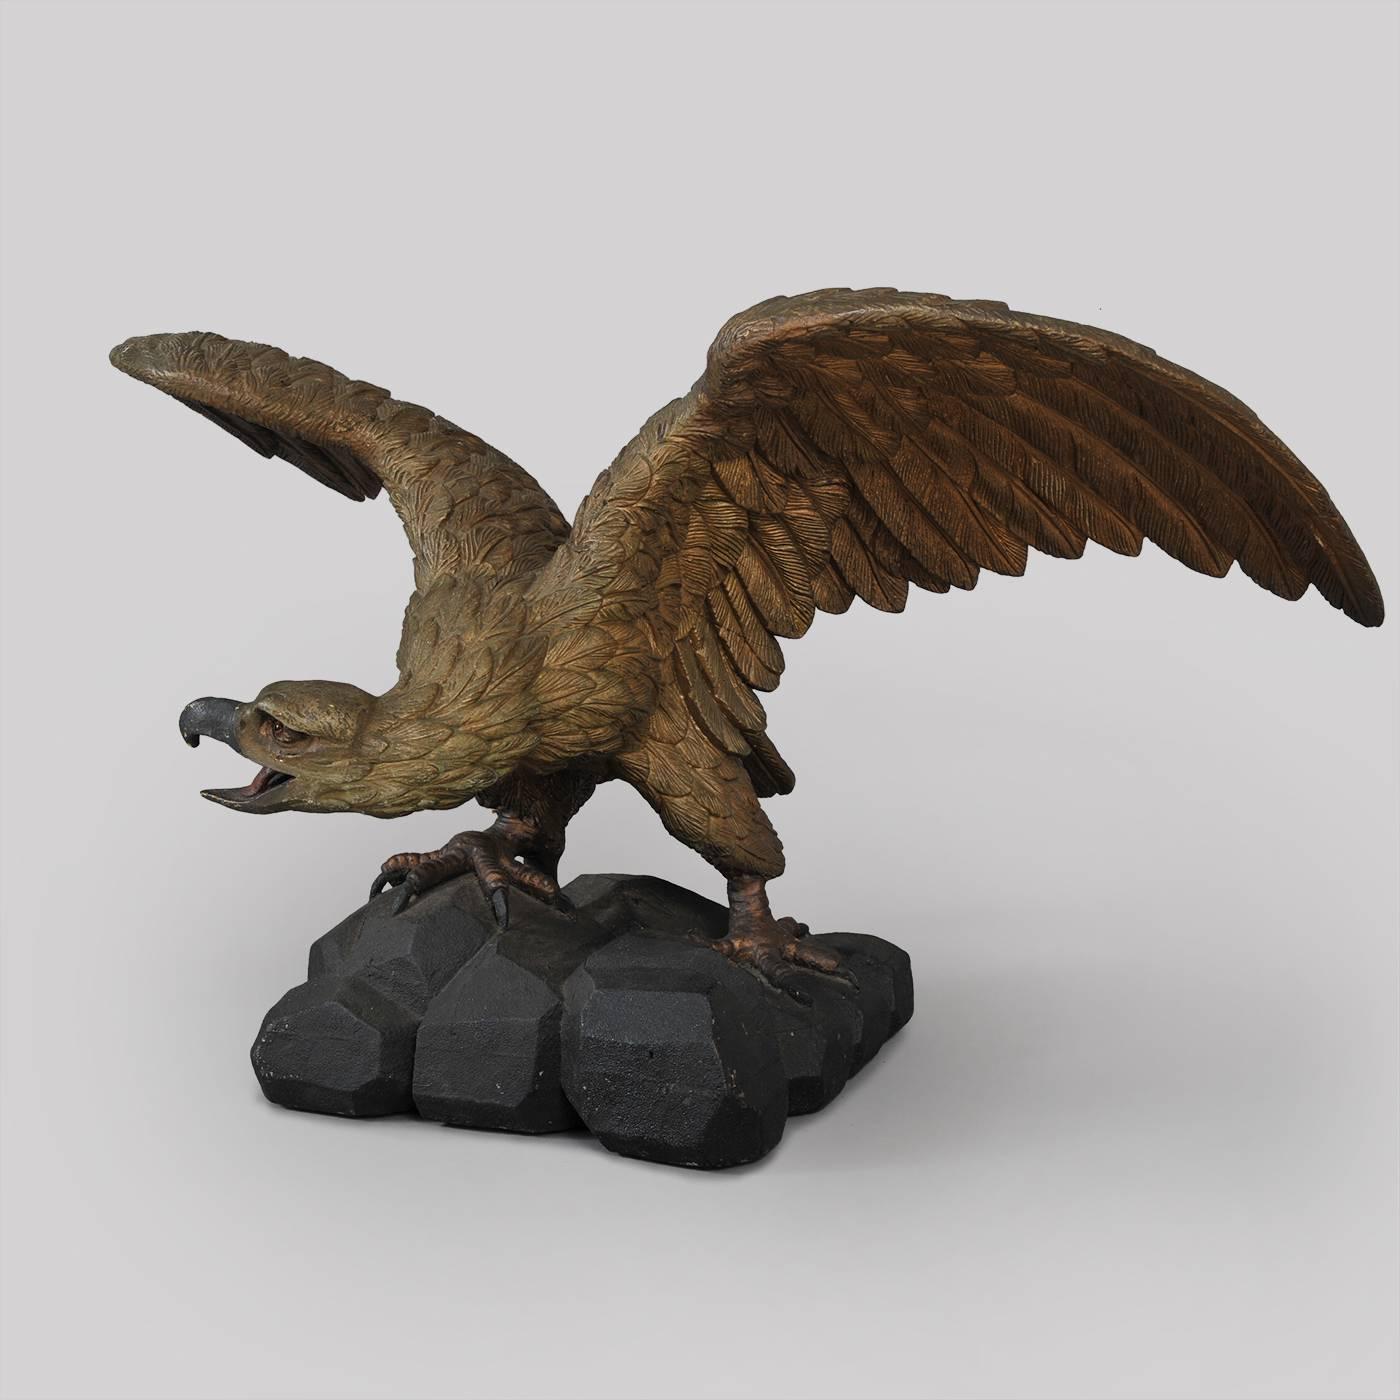 American. Probably Pennsylvania, early 19th century.
Exceptionally well carved pine with painted and gilt surface.
Condition: The eagle retains several surfaces of gilt and black paint, aged and oxidized due to outdoor elements, minor